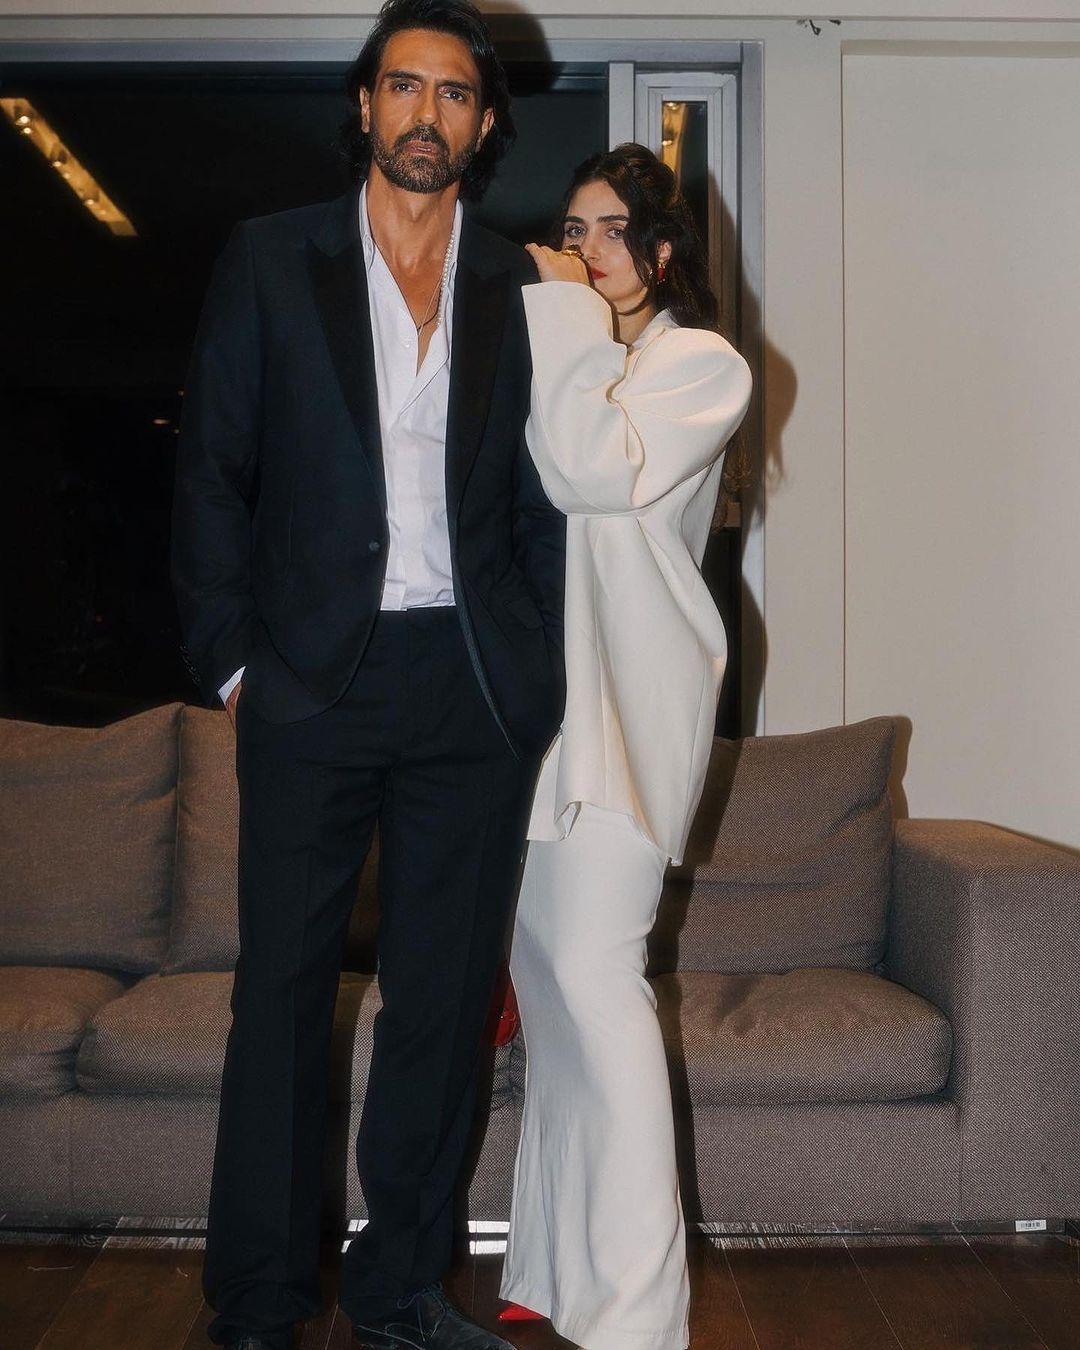 Arjun Rampal and Gabriella Demetriades
On July 20, the 'Roy' actor took to his social media account to announce the birth of his second kid, a baby boy with girlfriend Gabriella Demetriades